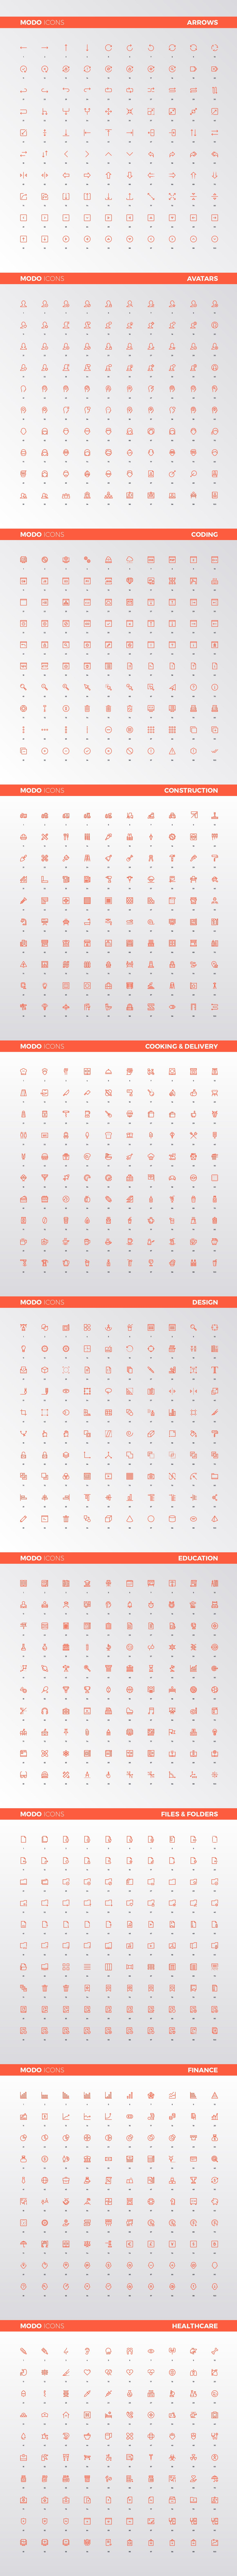 modo icons full preview part 1 828